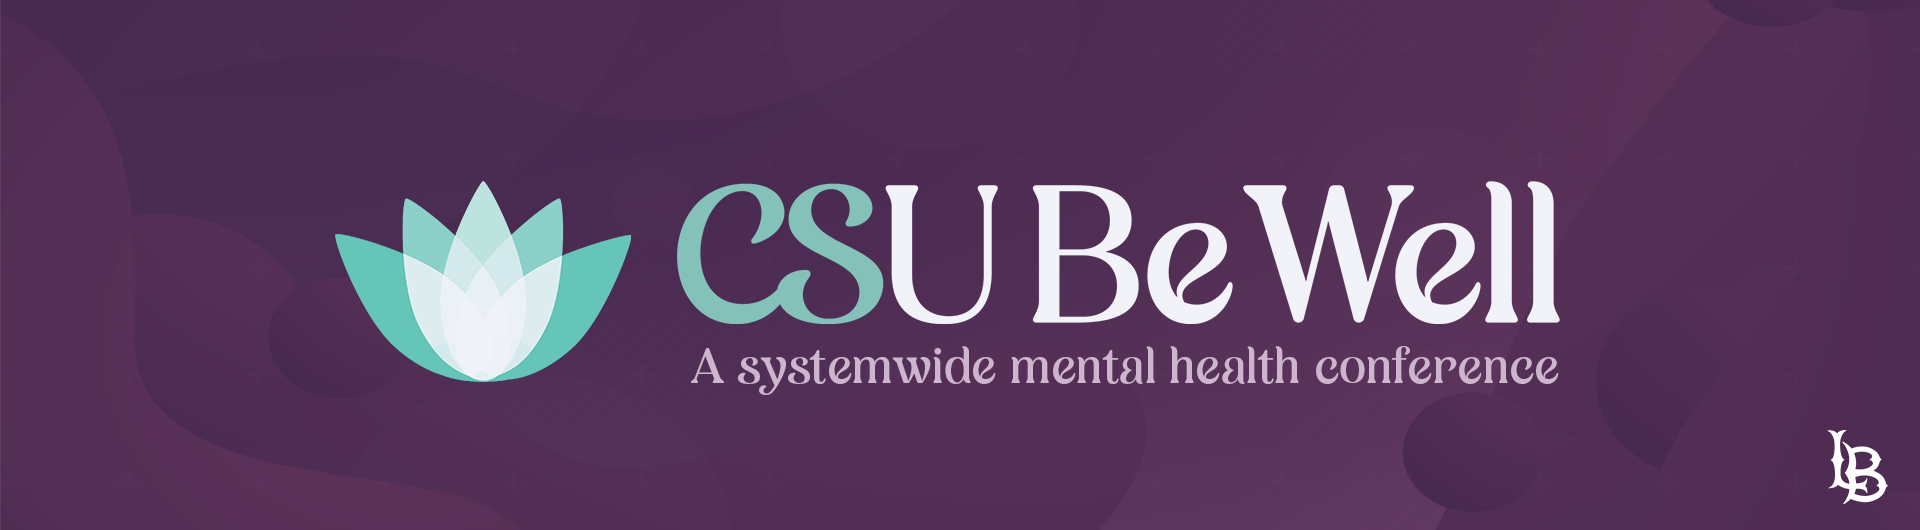 CSU Be Well - A systemwide mental health conference